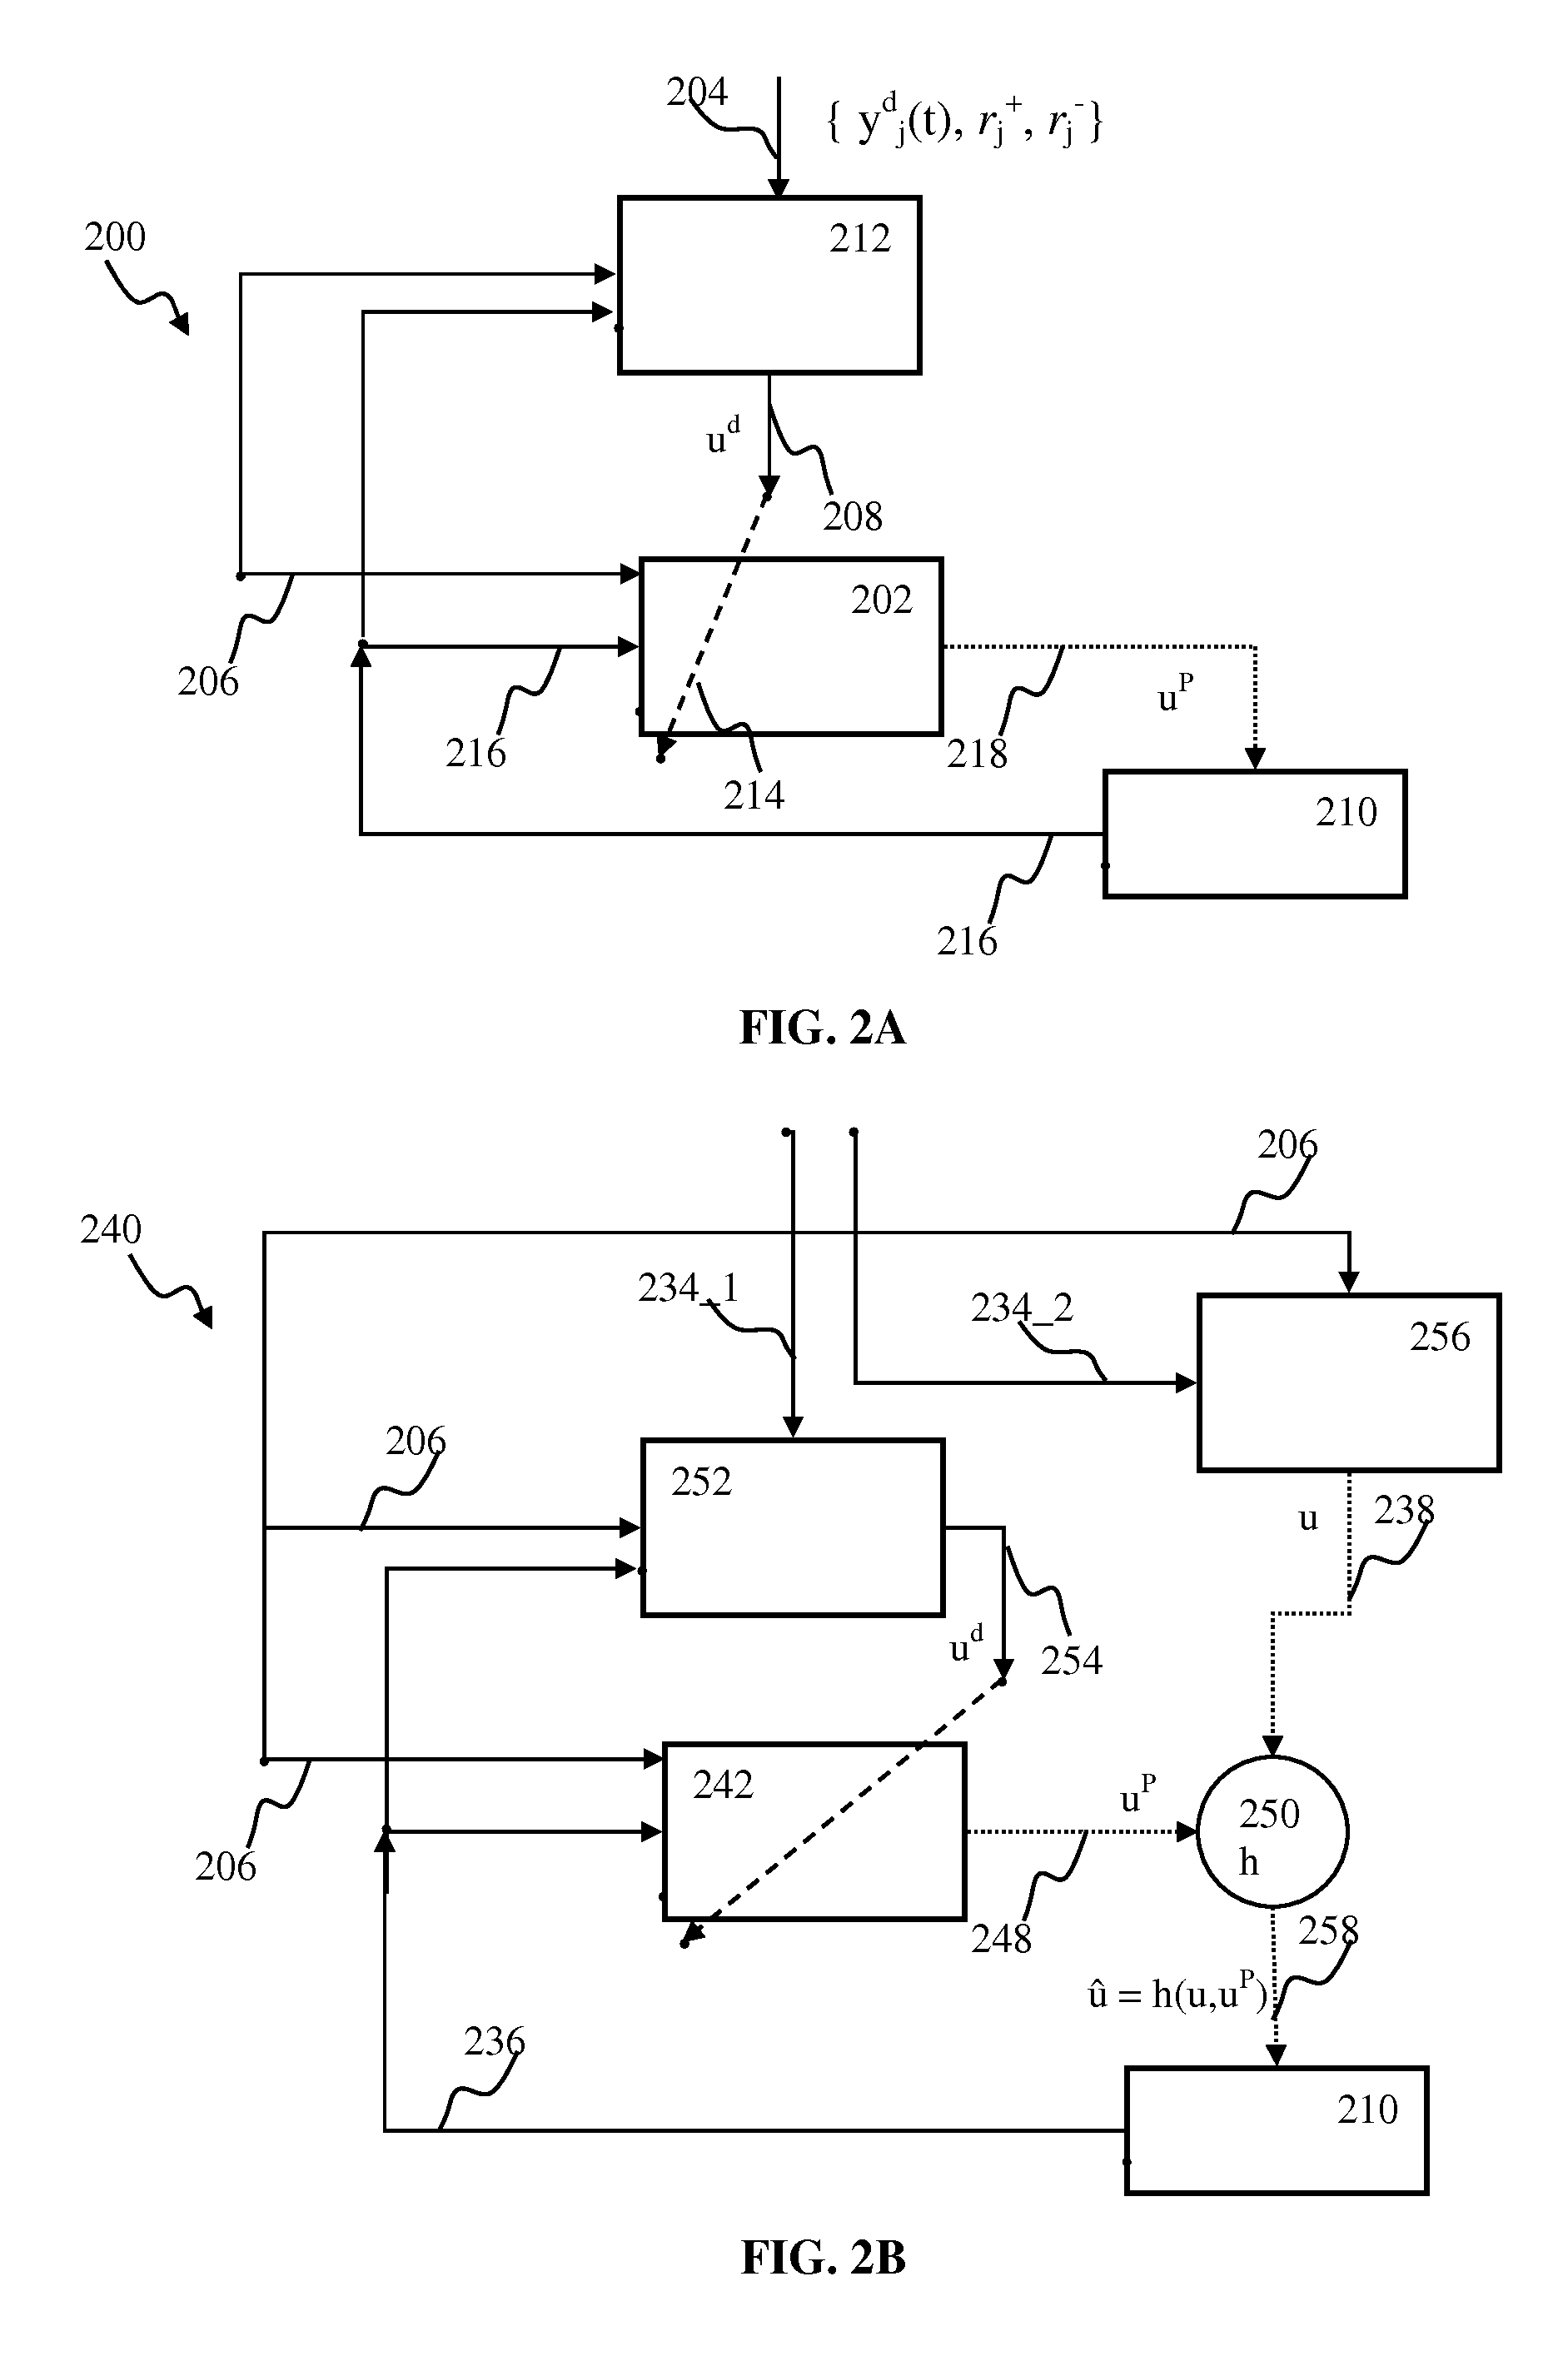 Apparatus and methods for reinforcement-guided supervised learning